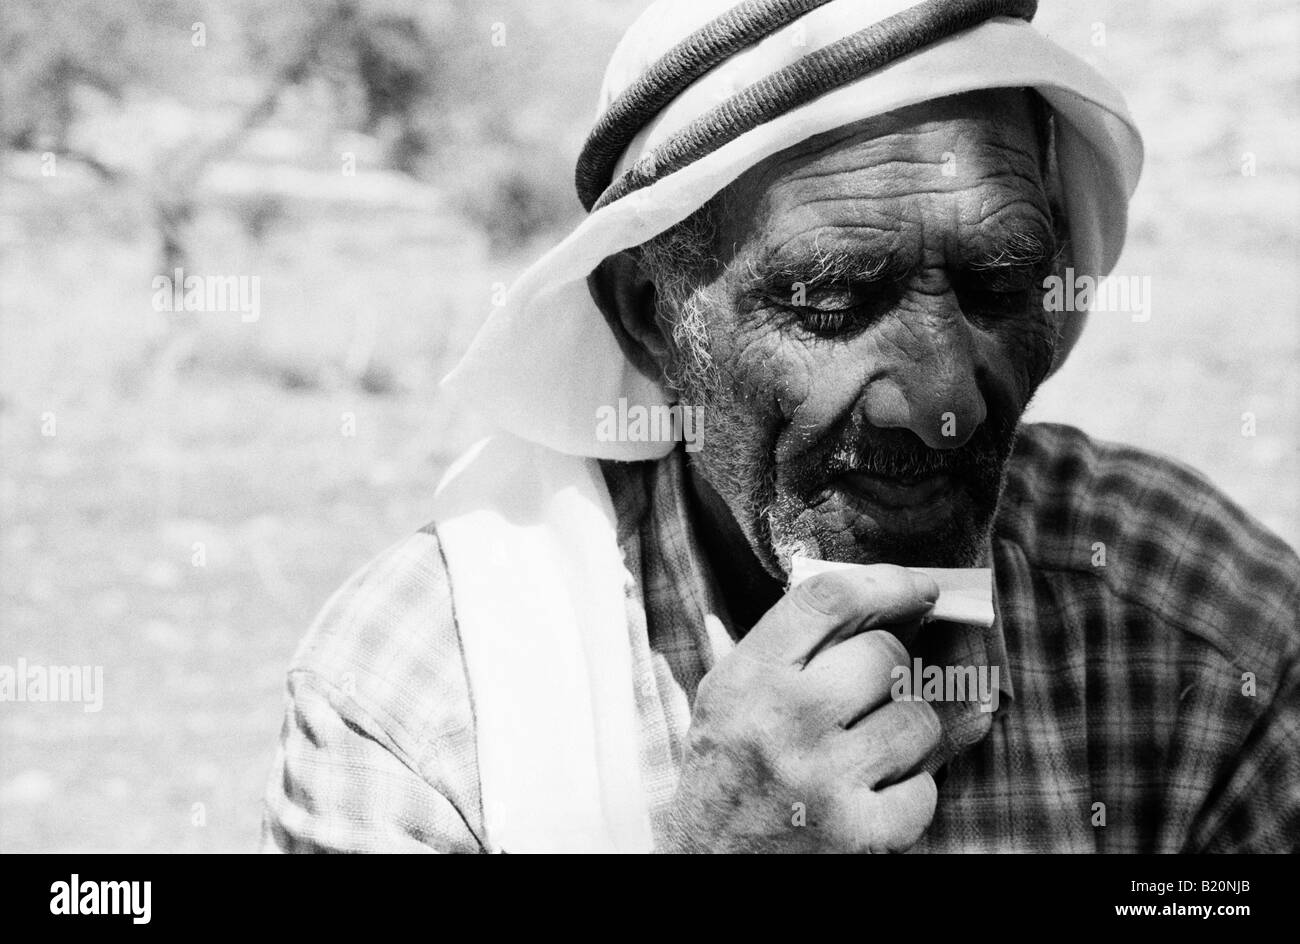 Palestinian man rolling a cigarette at harvest time Awarta Palestinian Occupied Territories Stock Photo